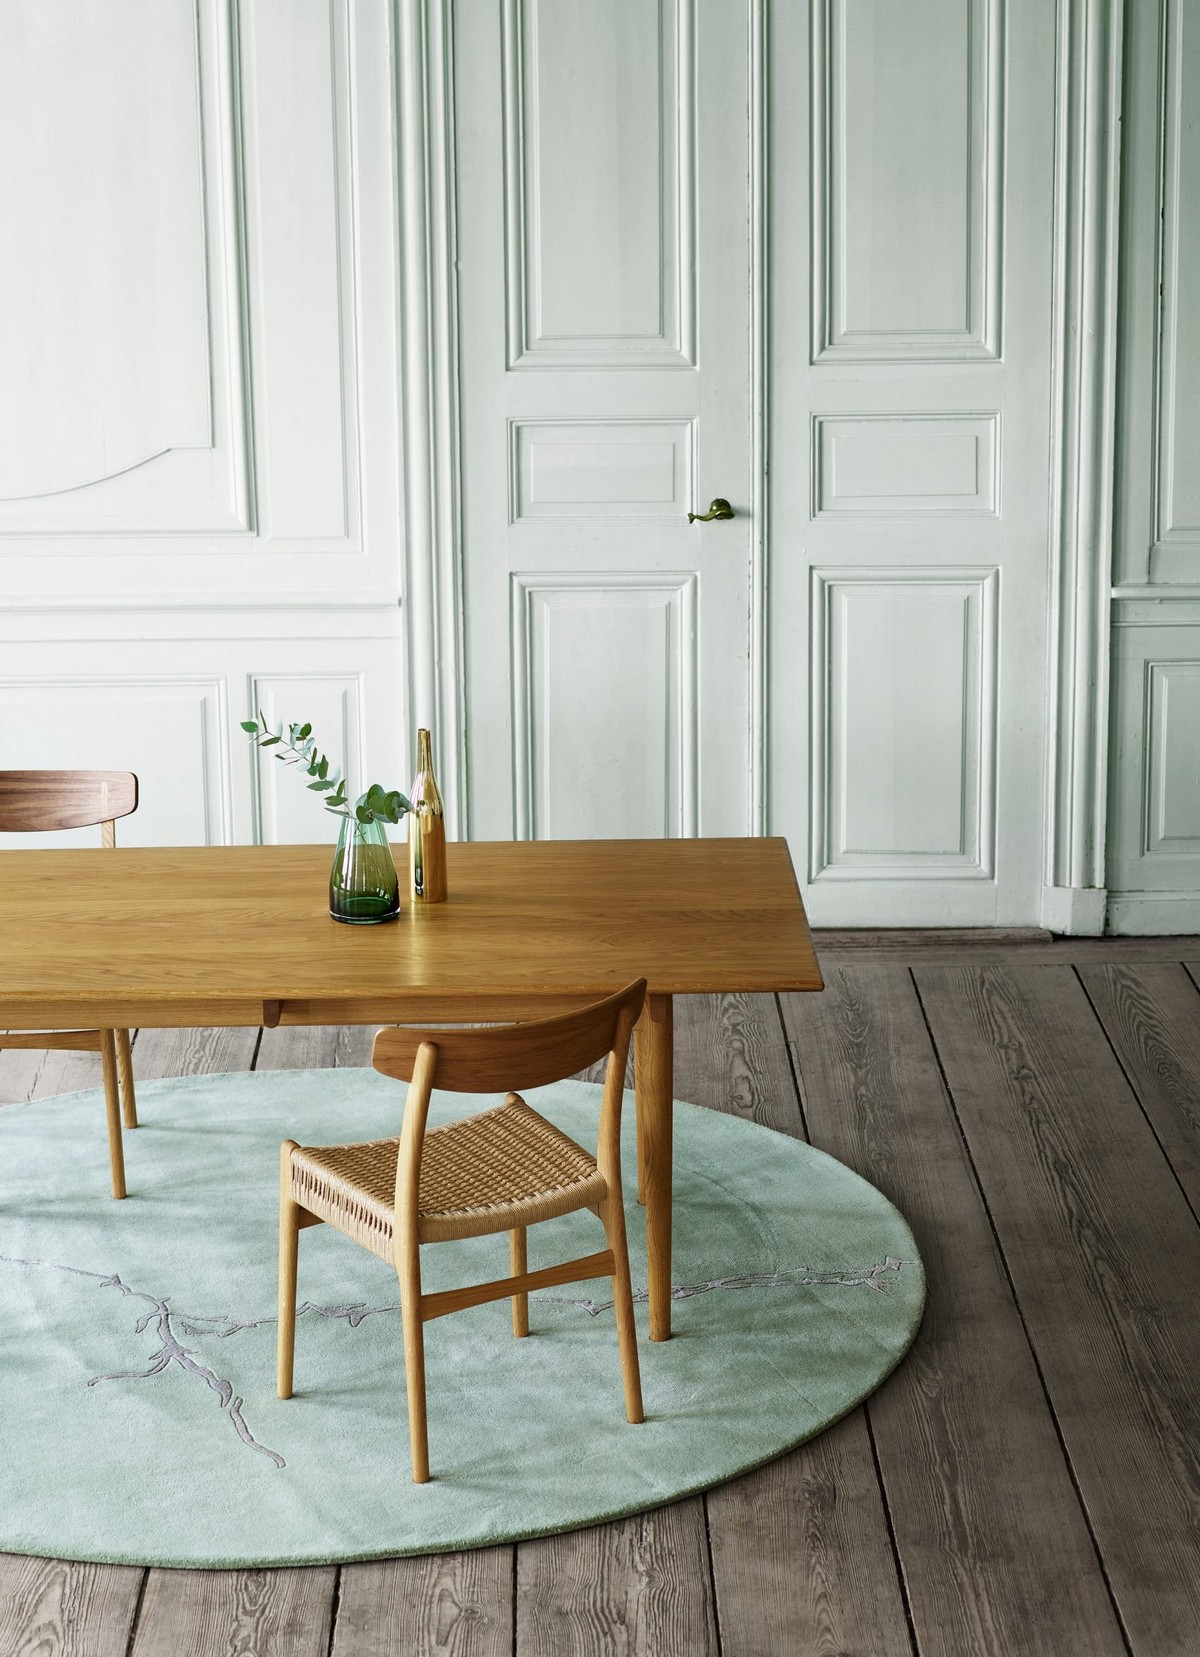 The Final Chair From The Original Hans J Wegner Collection of Four | Carl Hansen & Son presented this year the relaunch of the Danish modernist chair. #interiordesign #diningroom #diningchair #homedesign